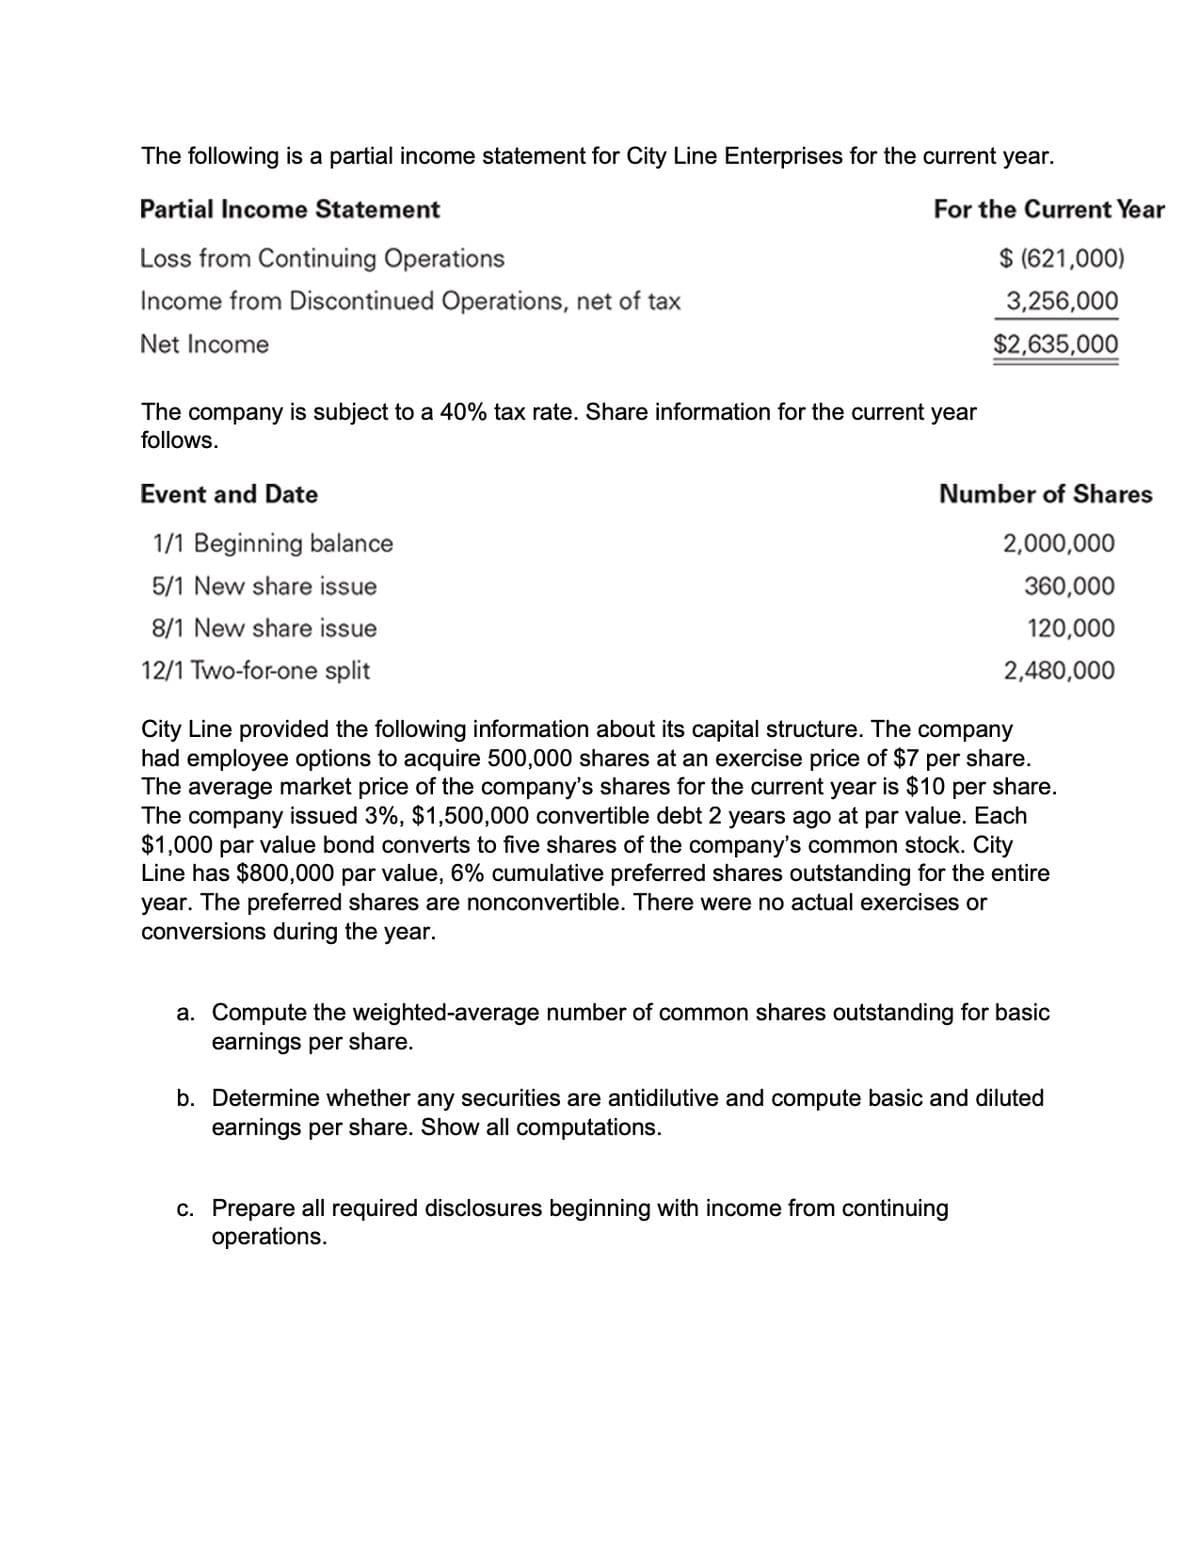 The following is a partial income statement for City Line Enterprises for the current year.
Partial Income Statement
Loss from Continuing Operations
Income from Discontinued Operations, net of tax
Net Income
For the Current Year
The company is subject to a 40% tax rate. Share information for the current year
follows.
Event and Date
1/1 Beginning balance
5/1 New share issue
8/1 New share issue
12/1 Two-for-one split
$ (621,000)
3,256,000
$2,635,000
Number of Shares
2,000,000
360,000
120,000
2,480,000
City Line provided the following information about its capital structure. The company
had employee options to acquire 500,000 shares at an exercise price of $7 per share.
The average market price of the company's shares for the current year is $10 per share.
The company issued 3%, $1,500,000 convertible debt 2 years ago at par value. Each
$1,000 par value bond converts to five shares of the company's common stock. City
Line has $800,000 par value, 6% cumulative preferred shares outstanding for the entire
year. The preferred shares are nonconvertible. There were no actual exercises or
conversions during the year.
a. Compute the weighted-average number of common shares outstanding for basic
earnings per share.
b. Determine whether any securities are antidilutive and compute basic and diluted
earnings per share. Show all computations.
c. Prepare all required disclosures beginning with income from continuing
operations.